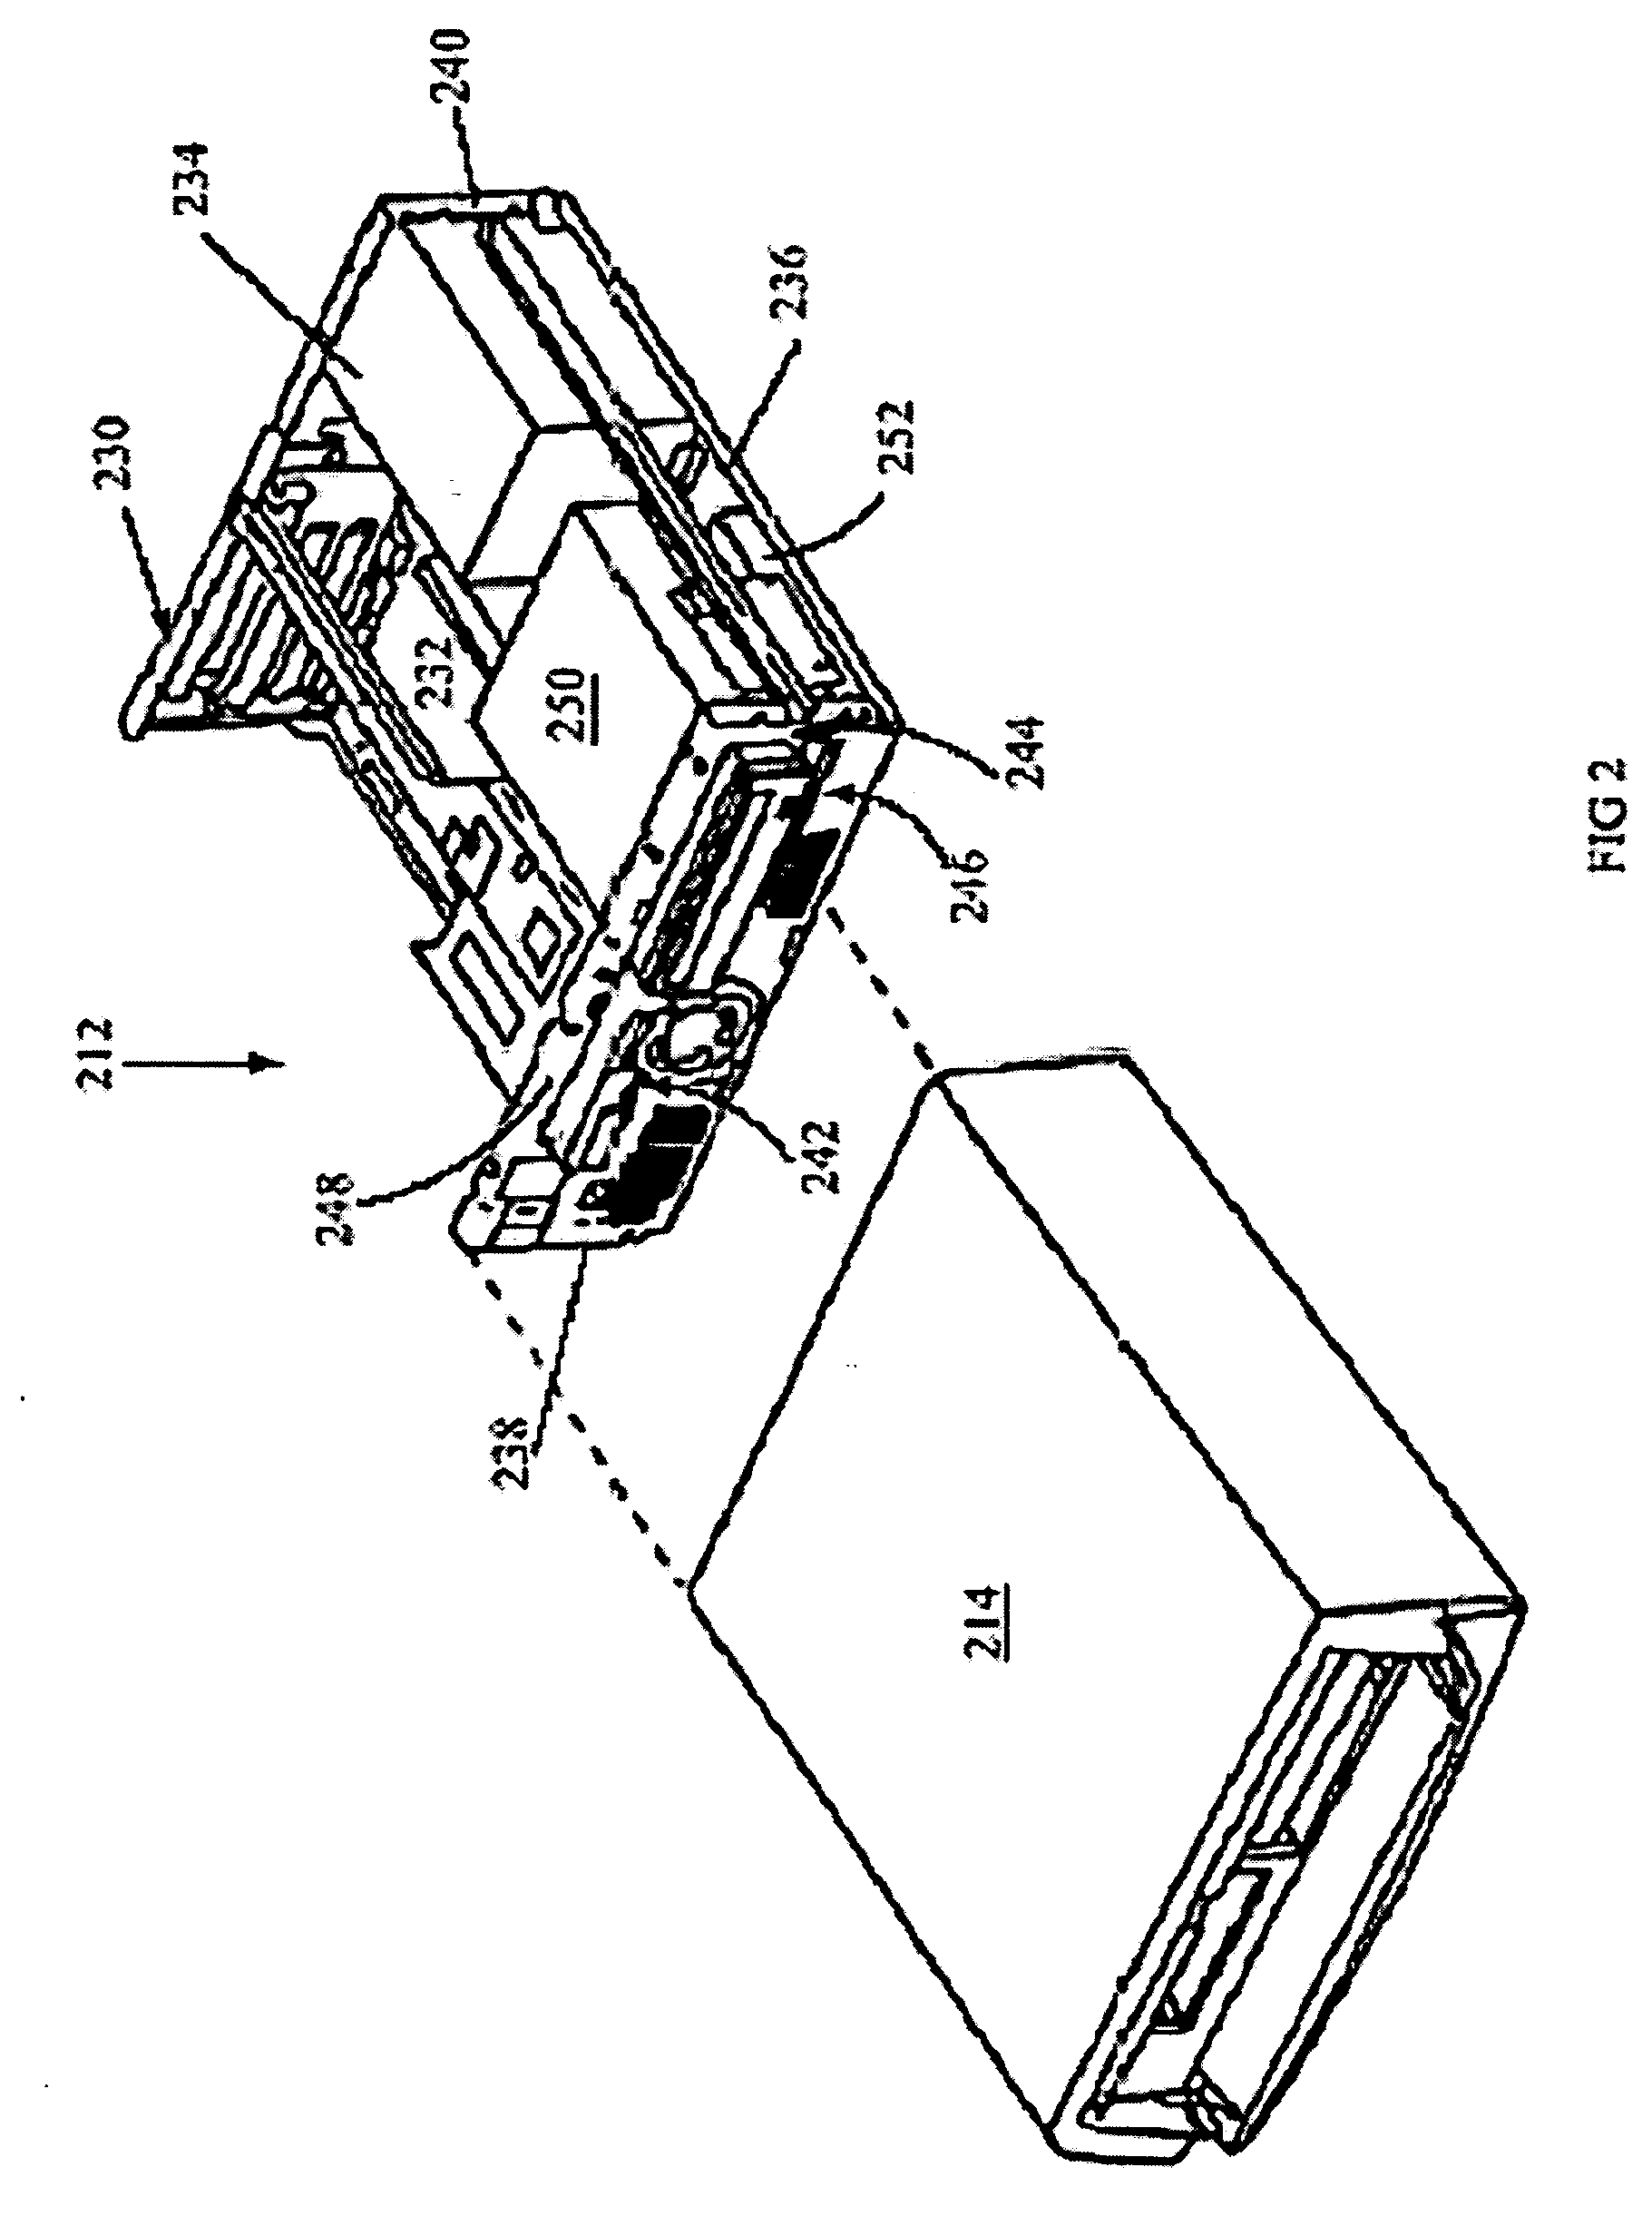 Systems, methods, and media for controlling temperature in a computer system